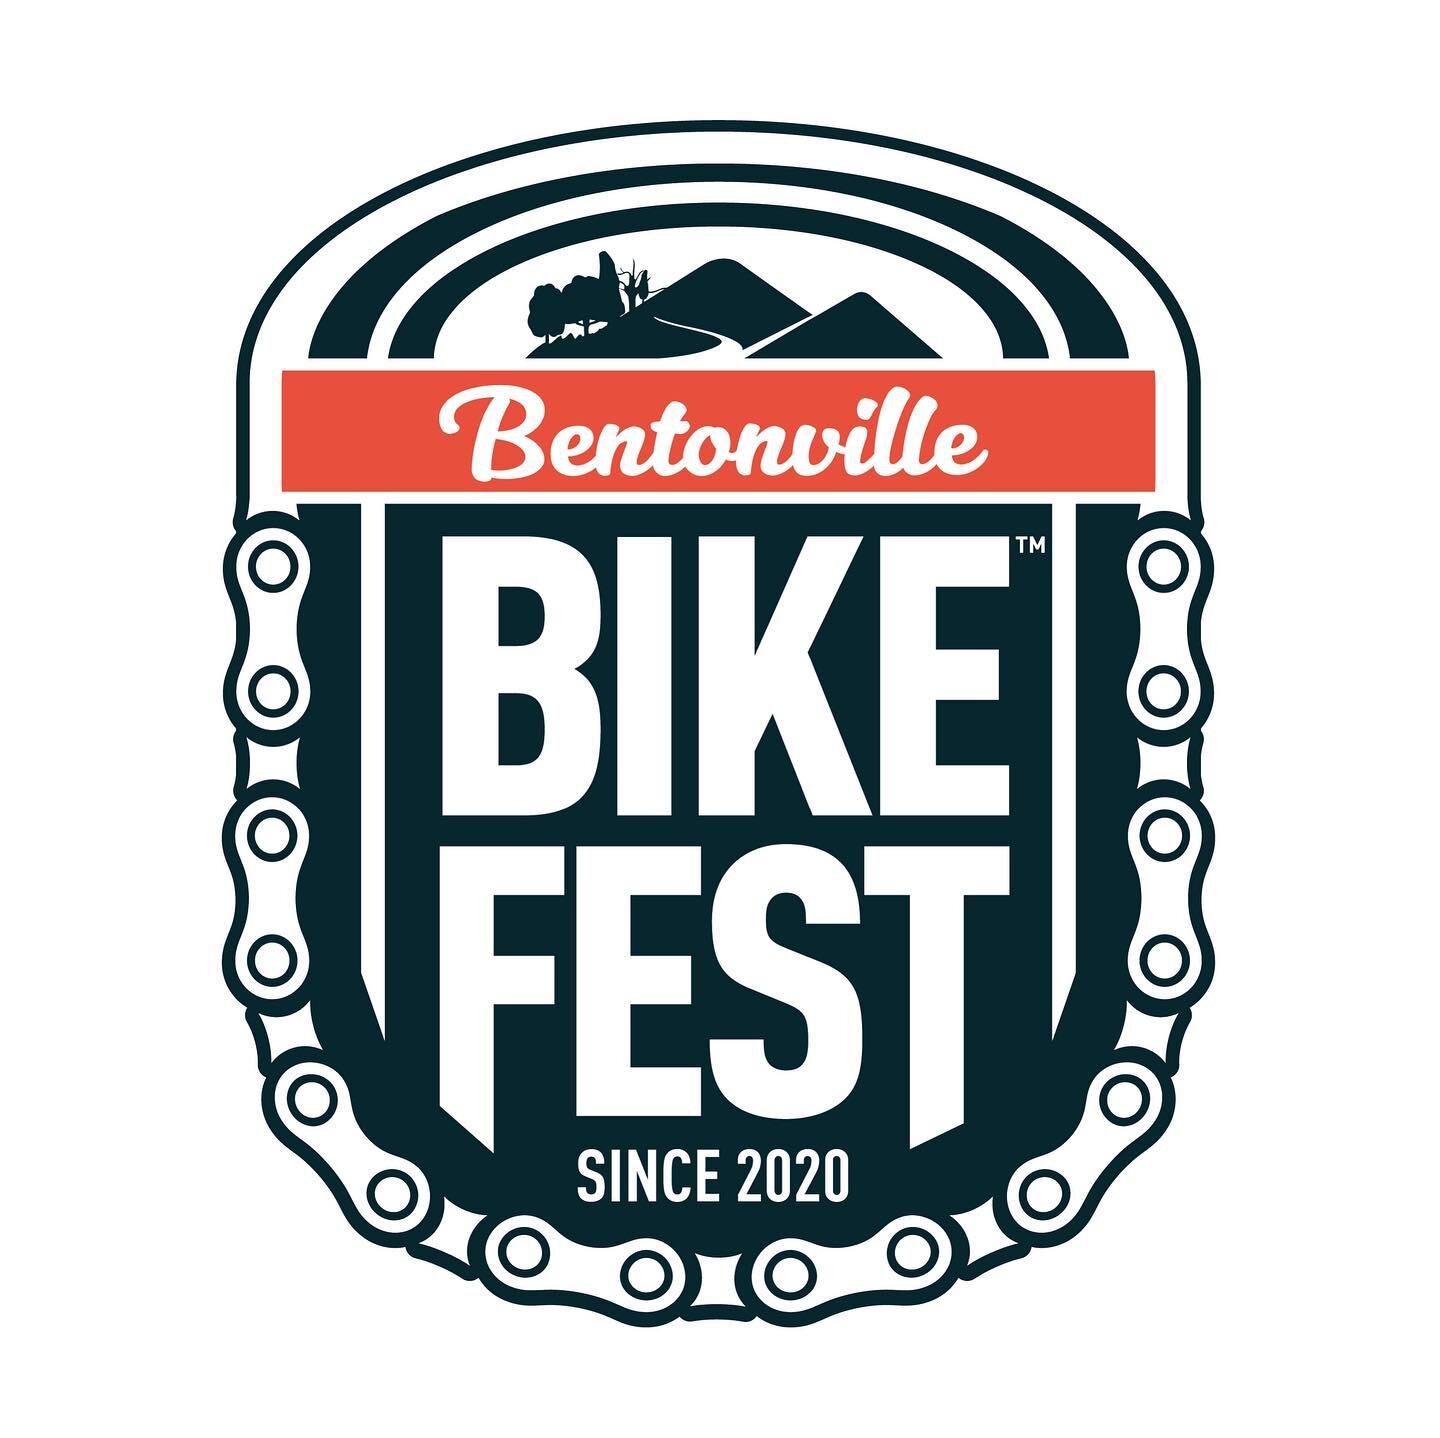 OZ Suspension Solutions will be at Bentonville Bike Fest 2022! Stop by our tent for giveaways and deals this weekend only!!! #bentonvillebikefest